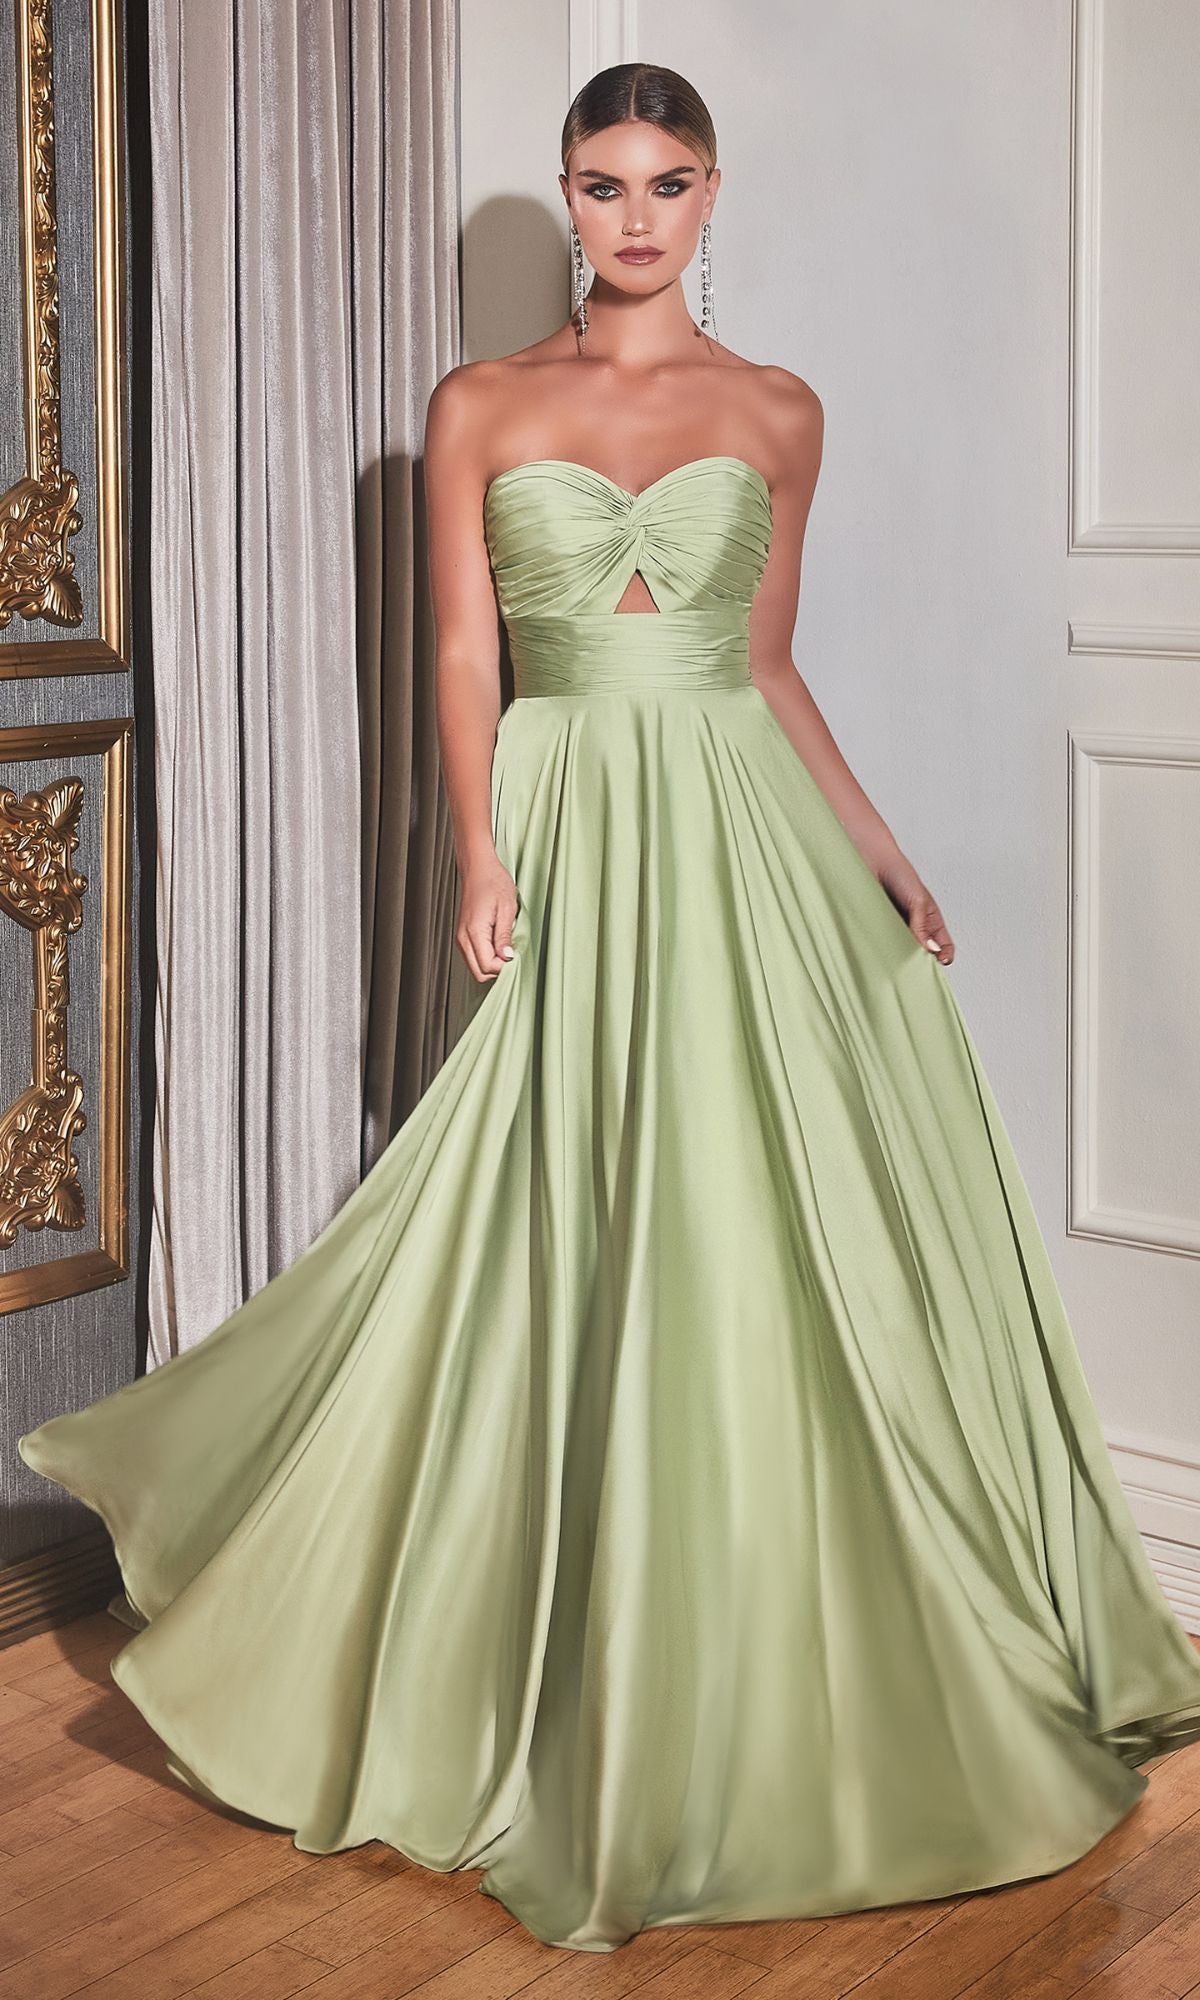 Strapless Sweetheart Long A-Line Prom Dress 7496